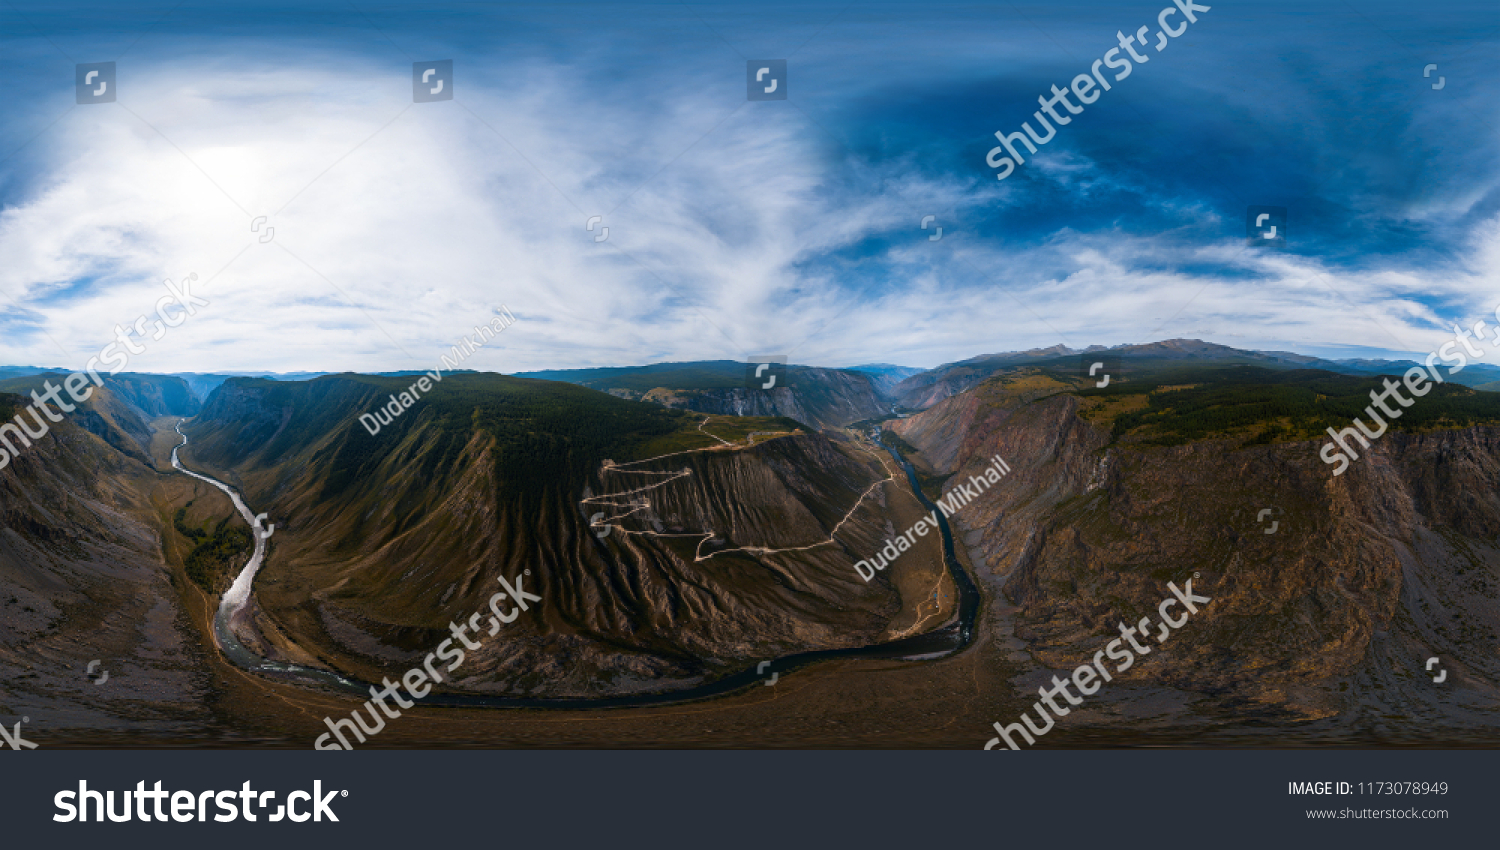 Spherical, 360 degrees, seamless aerial panorama of the Katu Yaryk mountain pass and the valley of the river of Chulyshman. Altai Republic, Russia #1173078949